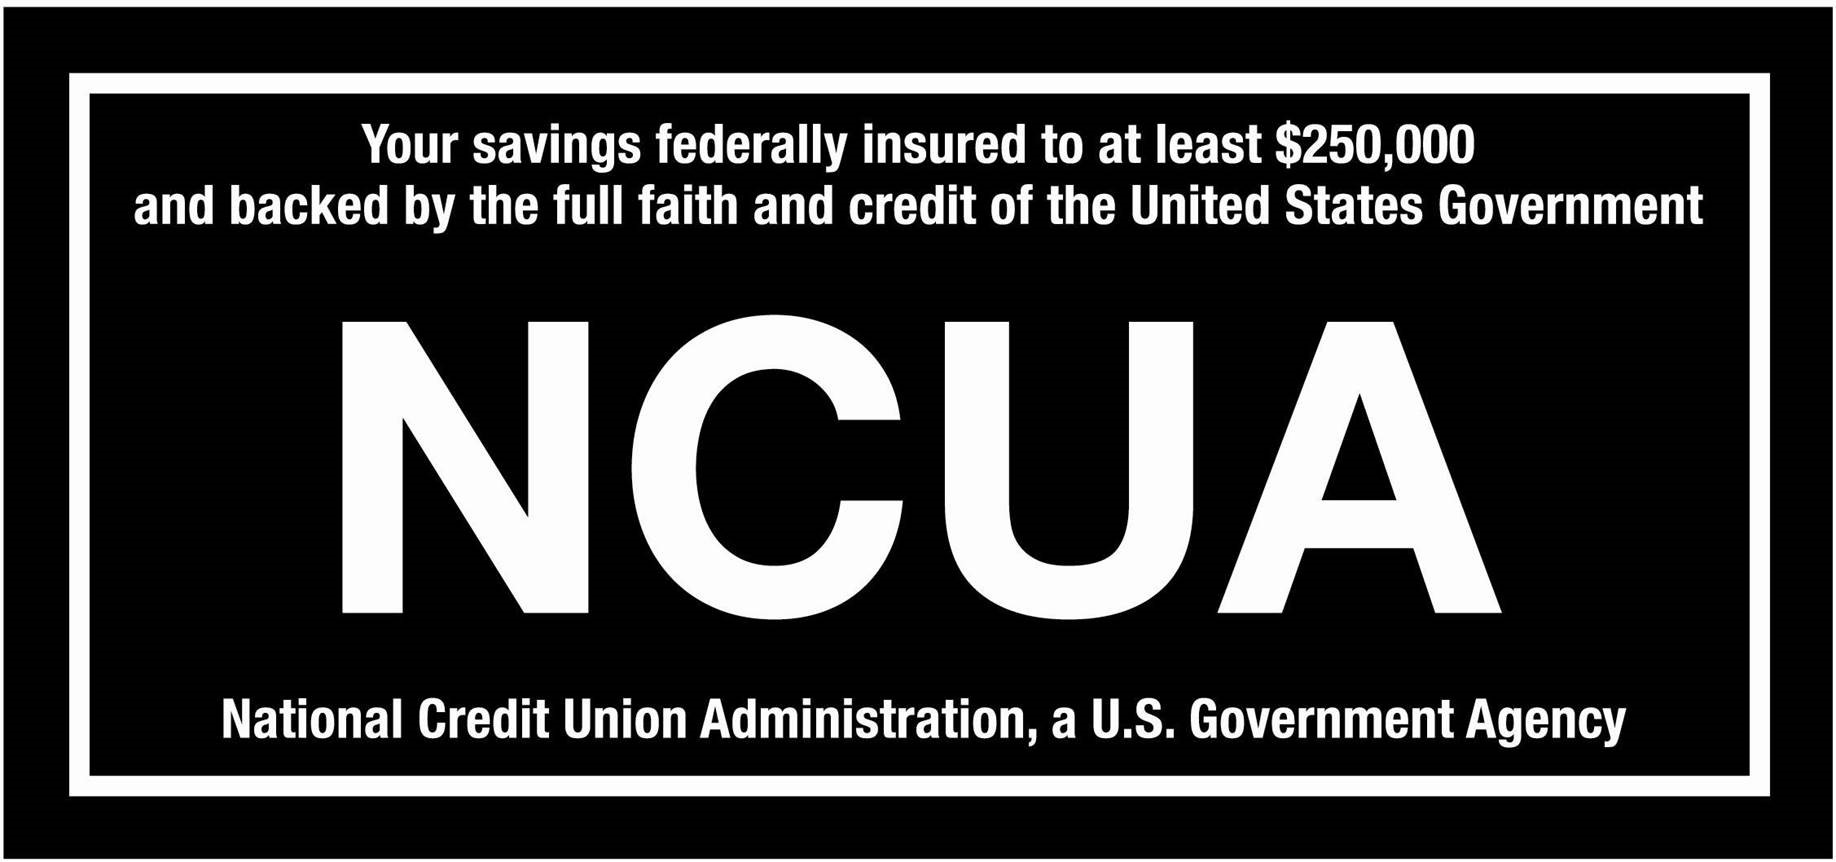 "Your savings are federally insured to at least $250,000 and backed by the full faith and credit of the United States Government.  National Credit Union Administration (NCUA), a U.S. Government Agency"